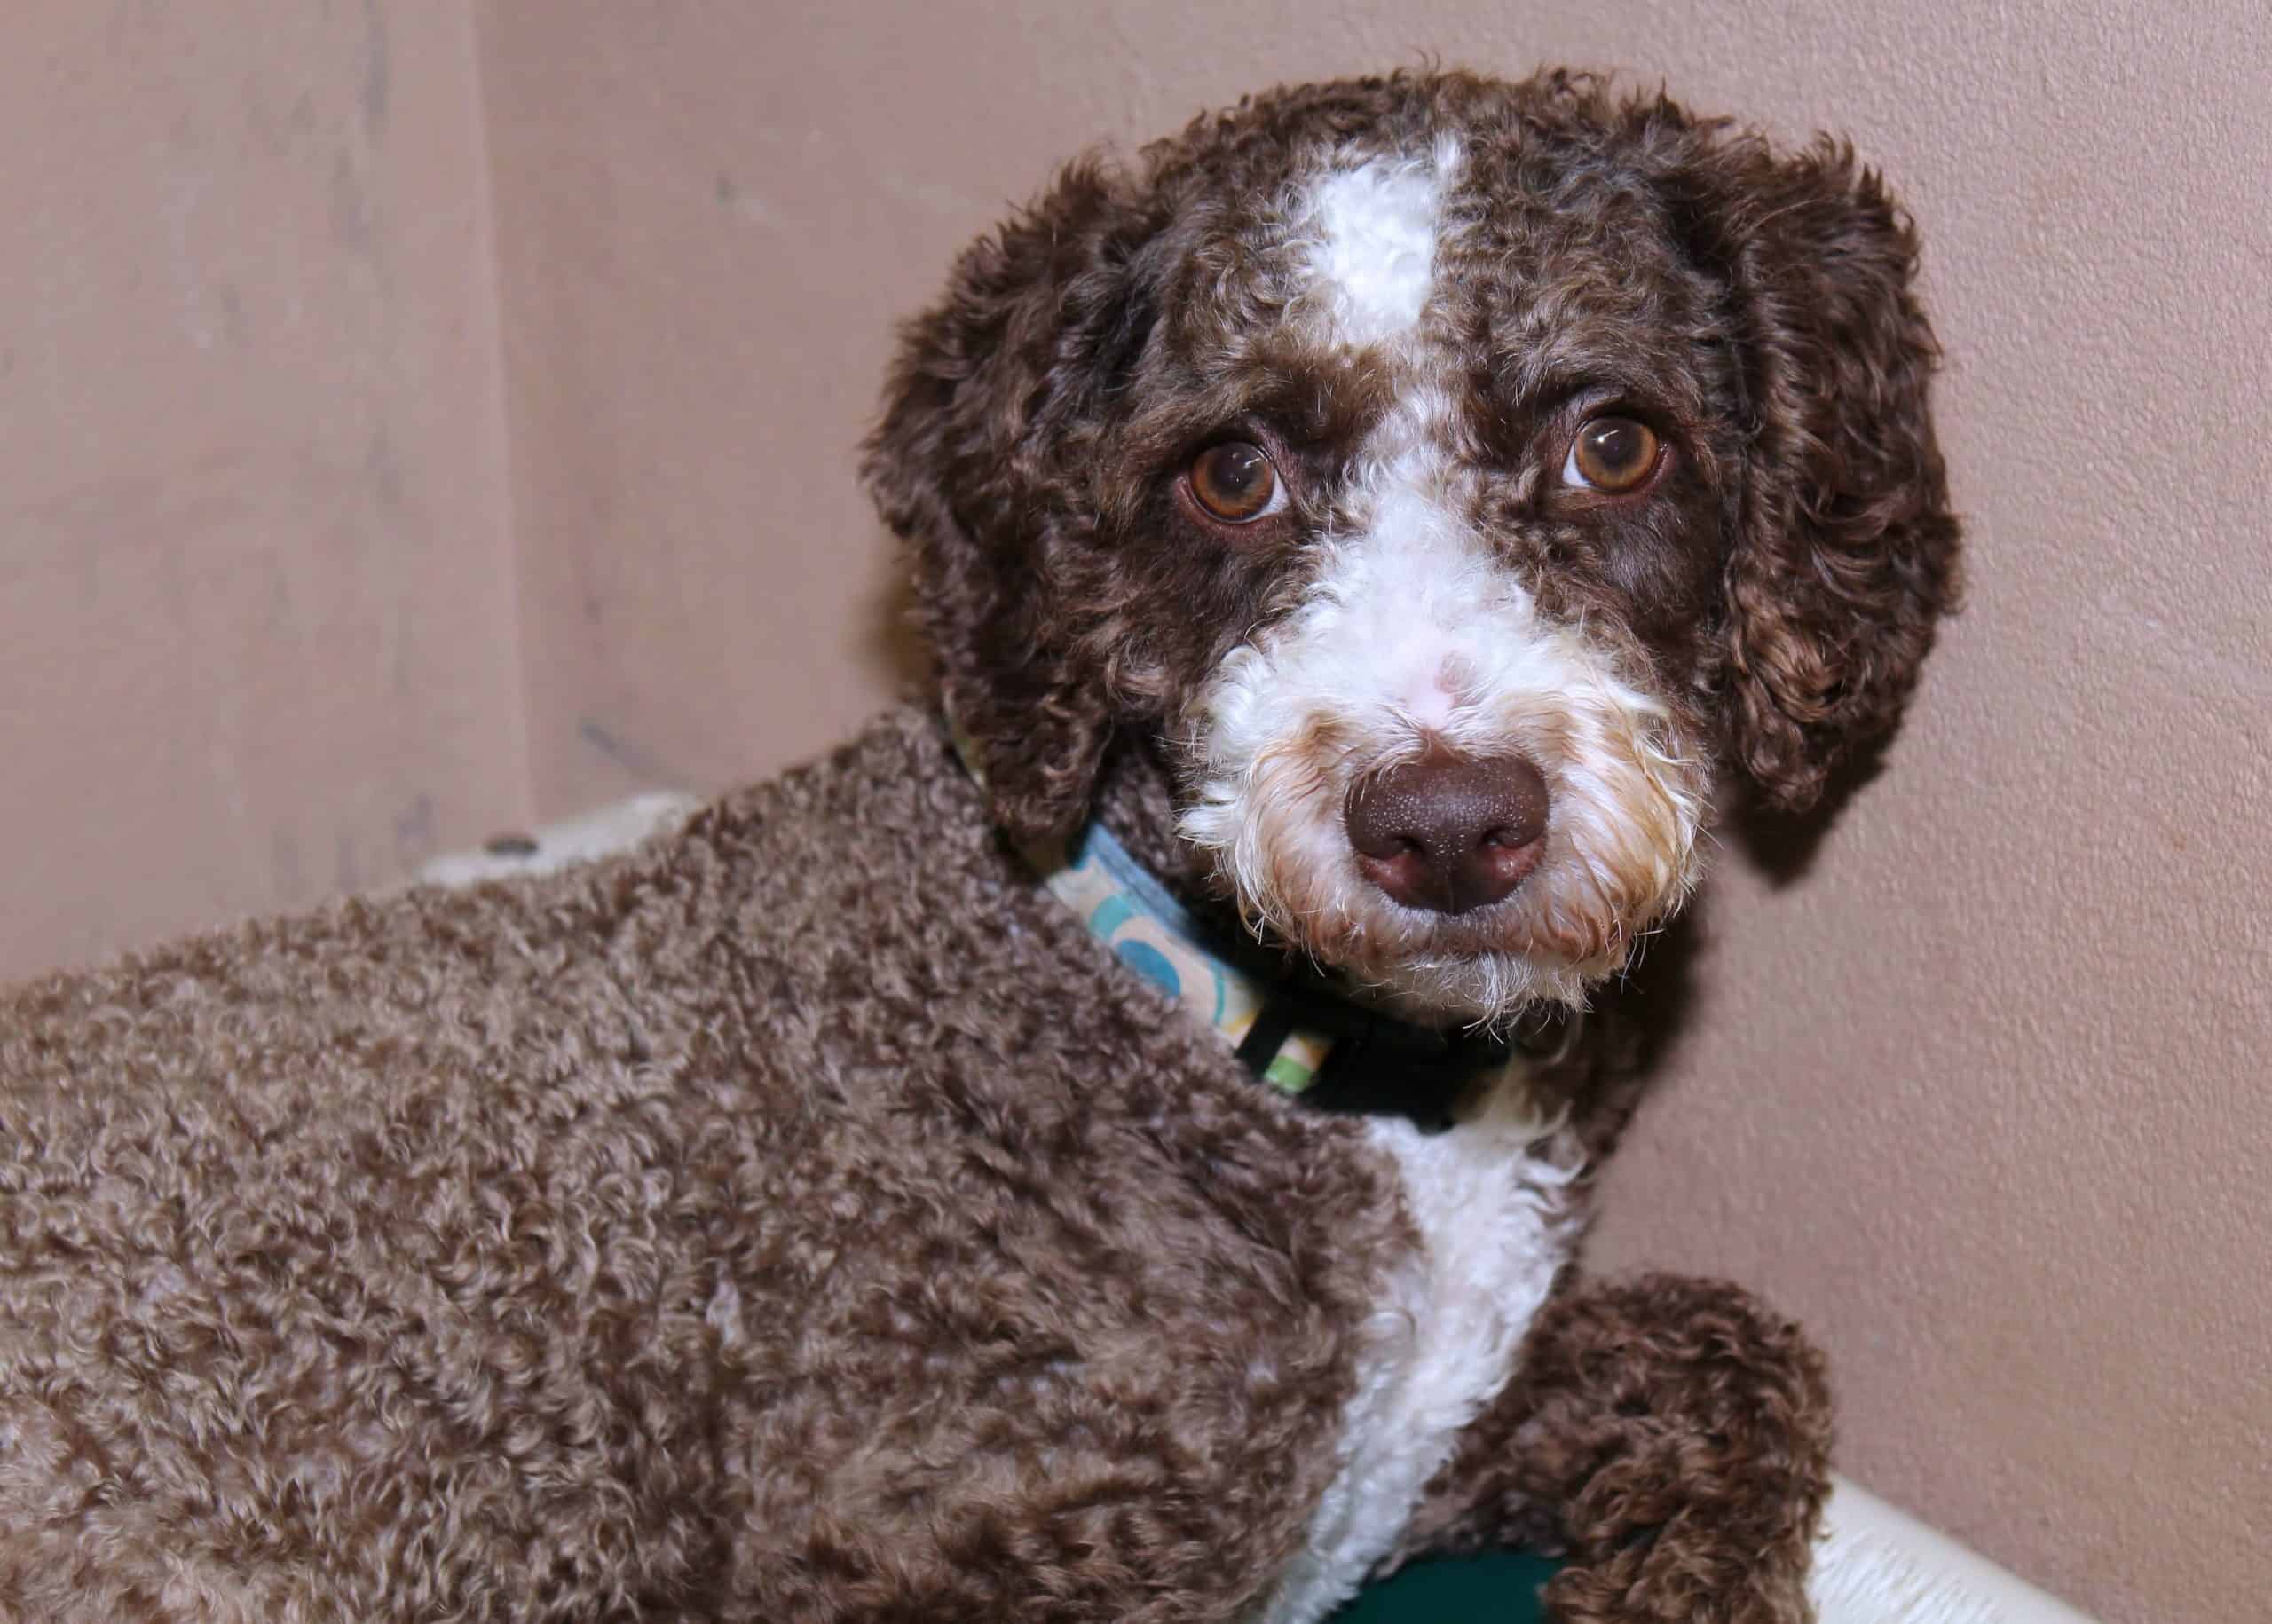 The Portugese water dog is considered a hypoallergenic breed.